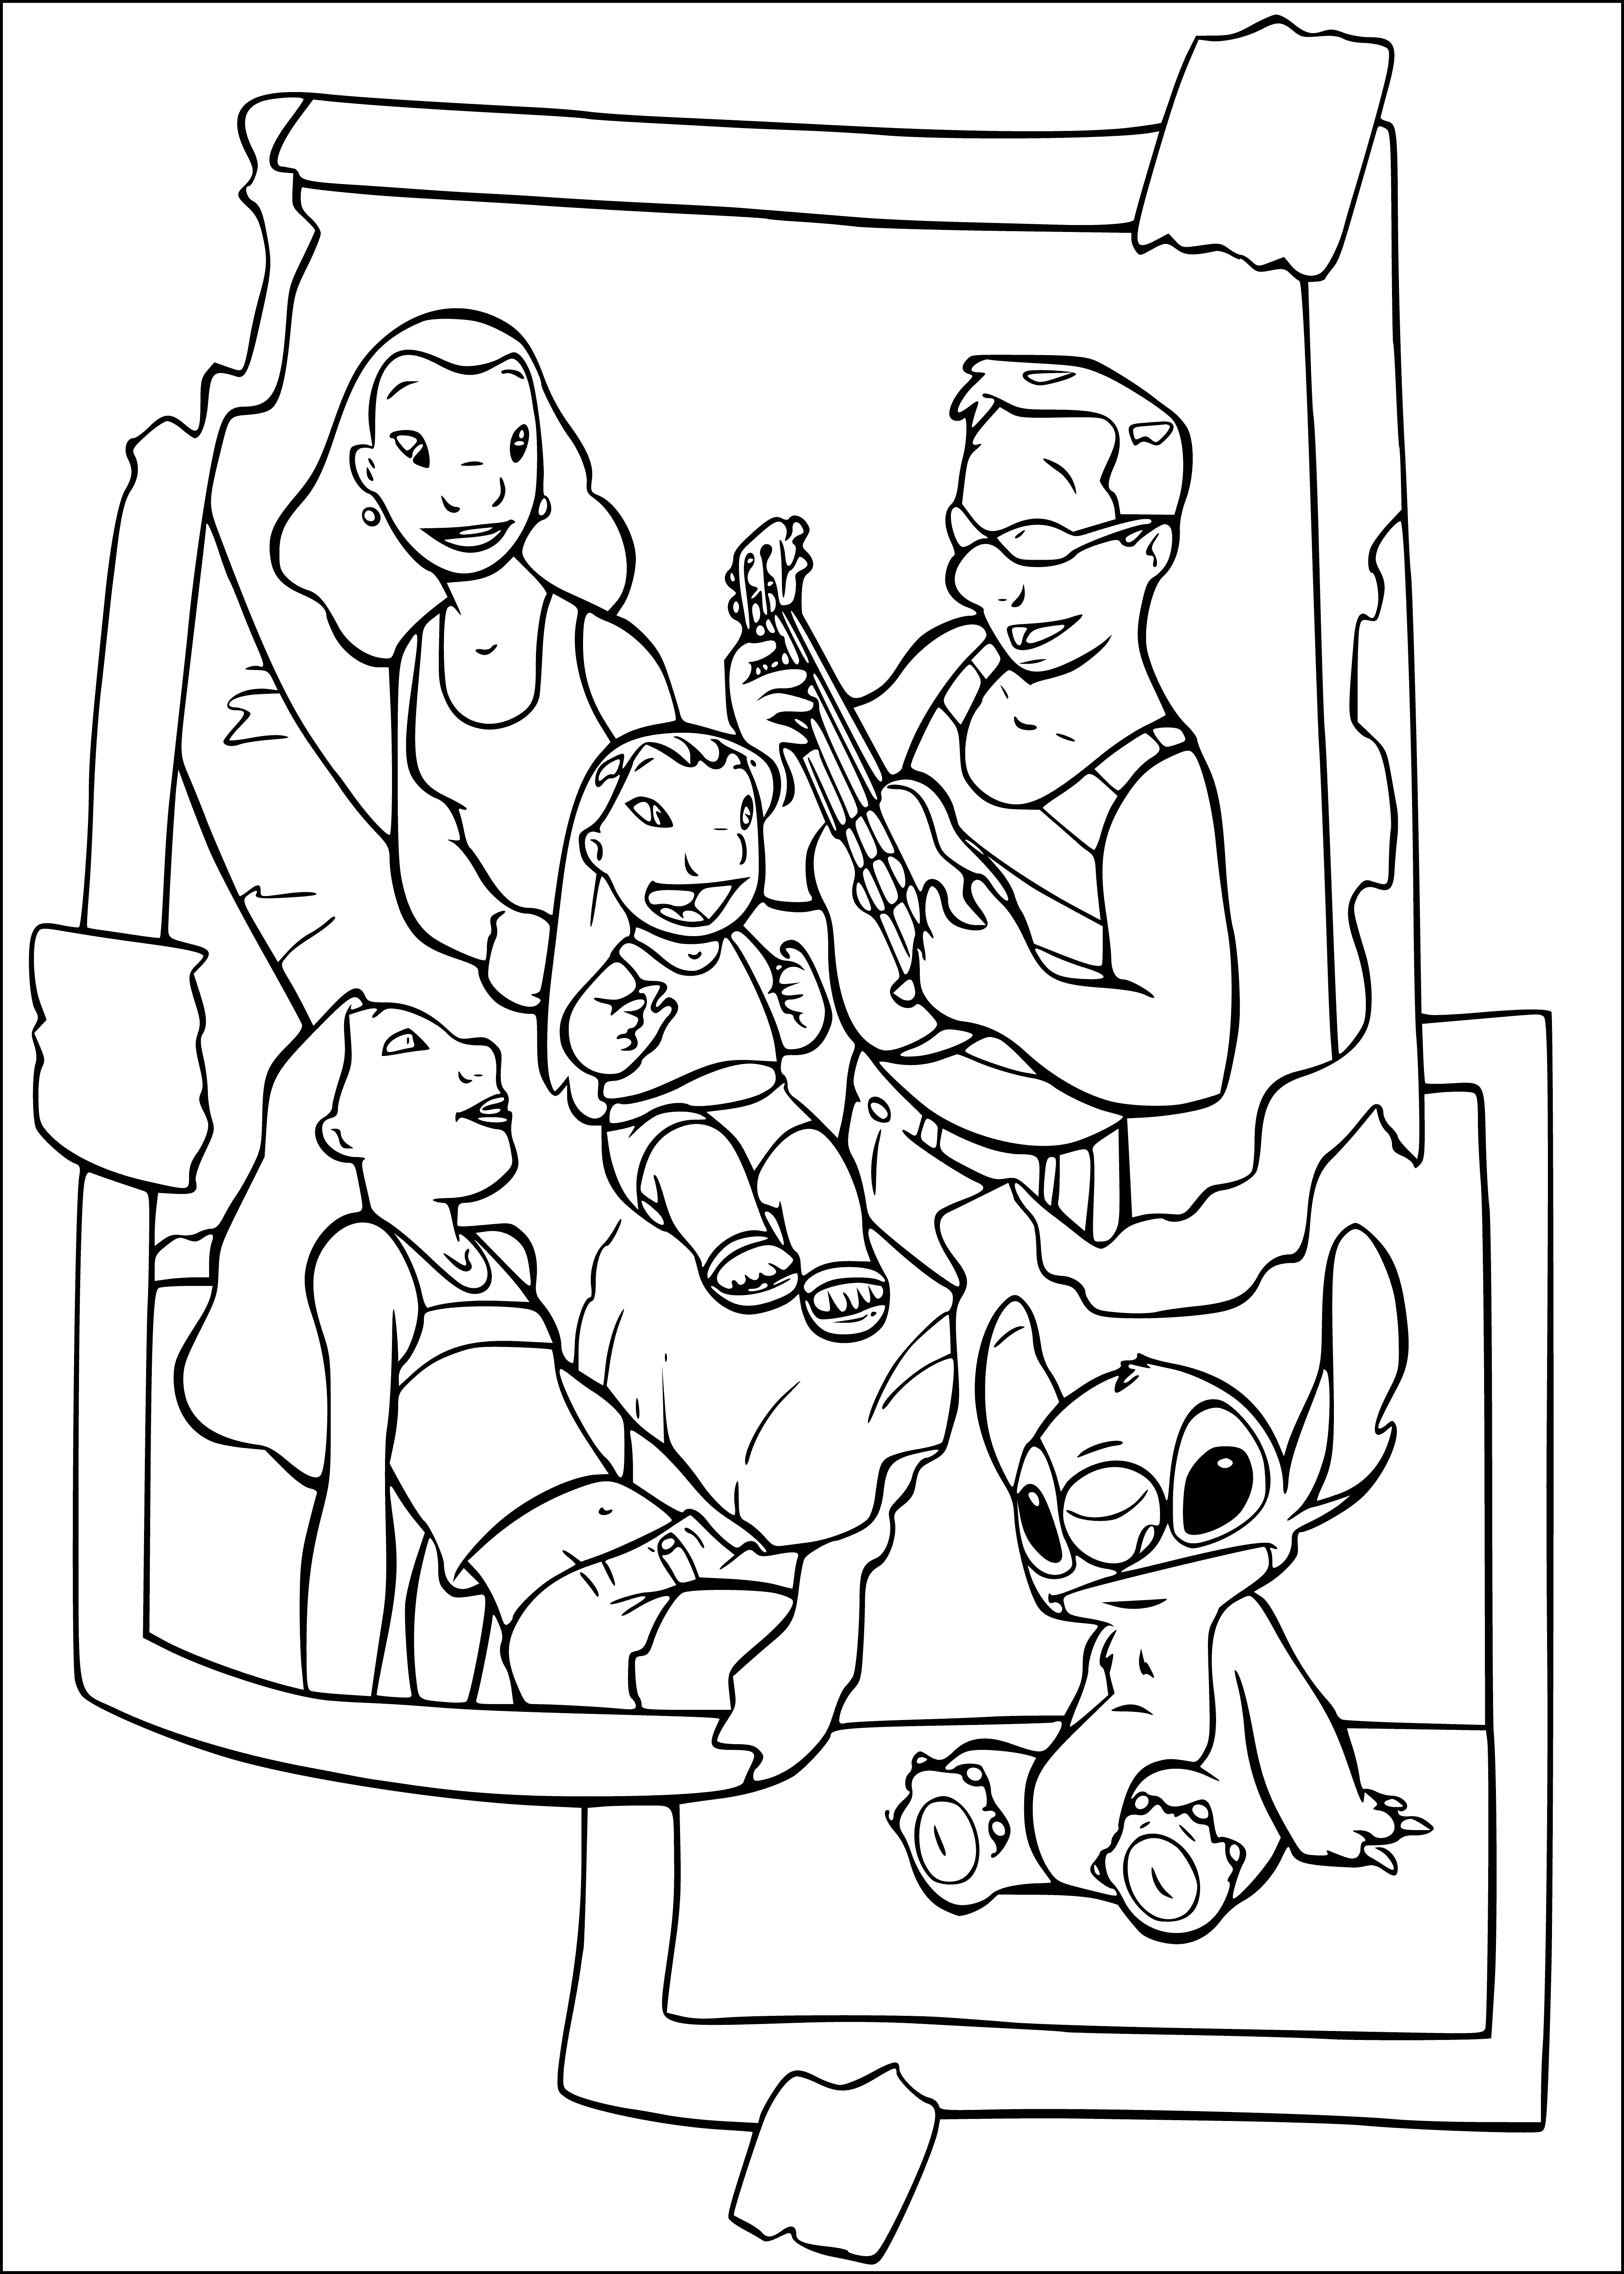 coloring page: Lilo and Stitch reunited and happy with new family, Lilo holding lei, big smiles, laughter and contentment shown.